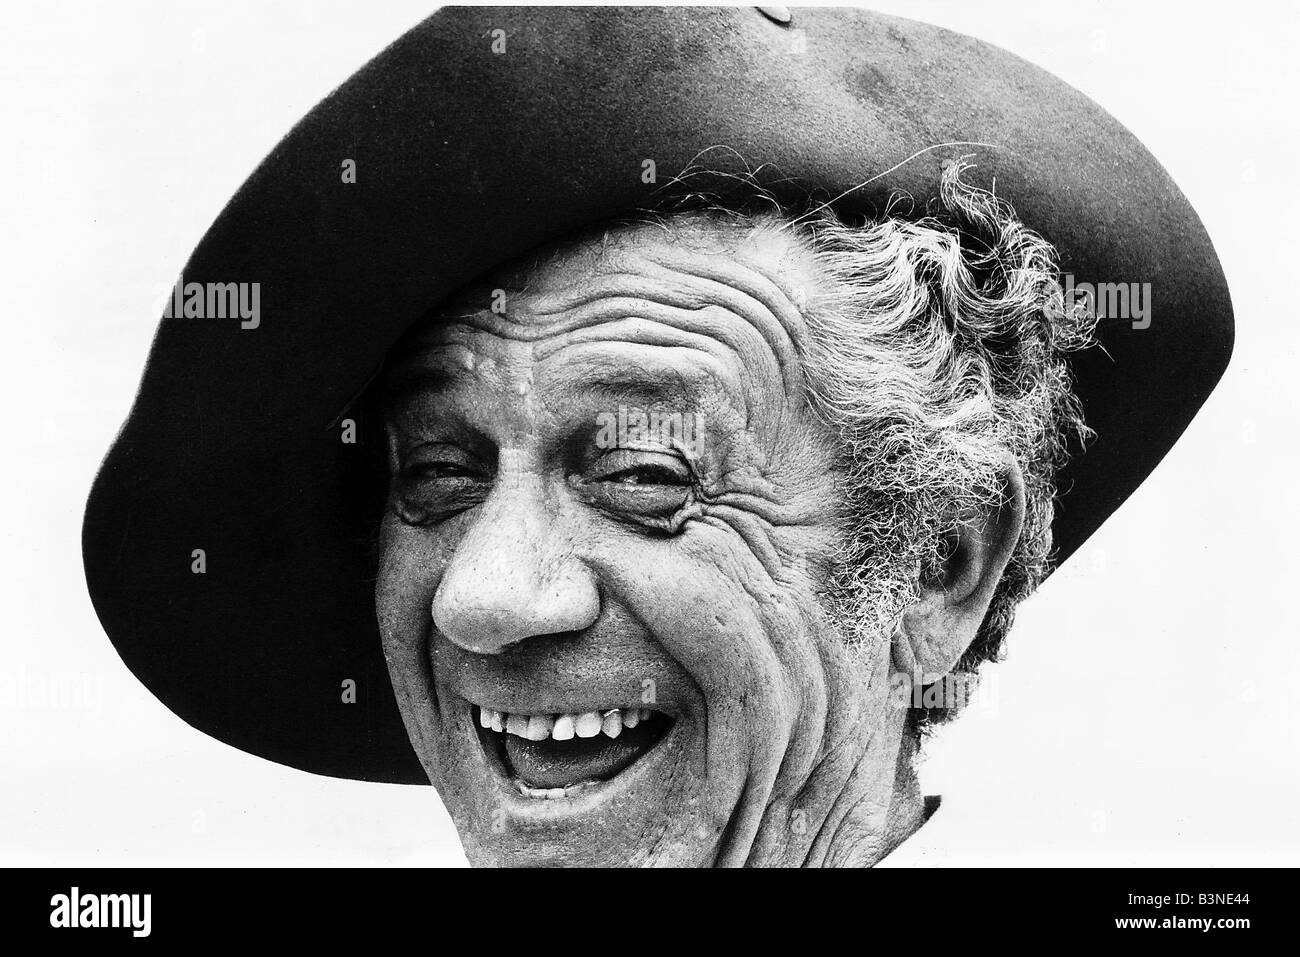 Sid James Comedy Actor Carry On Films before going to Australia where he was conceived to star on stage in a production called Marriage Fever Stock Photo